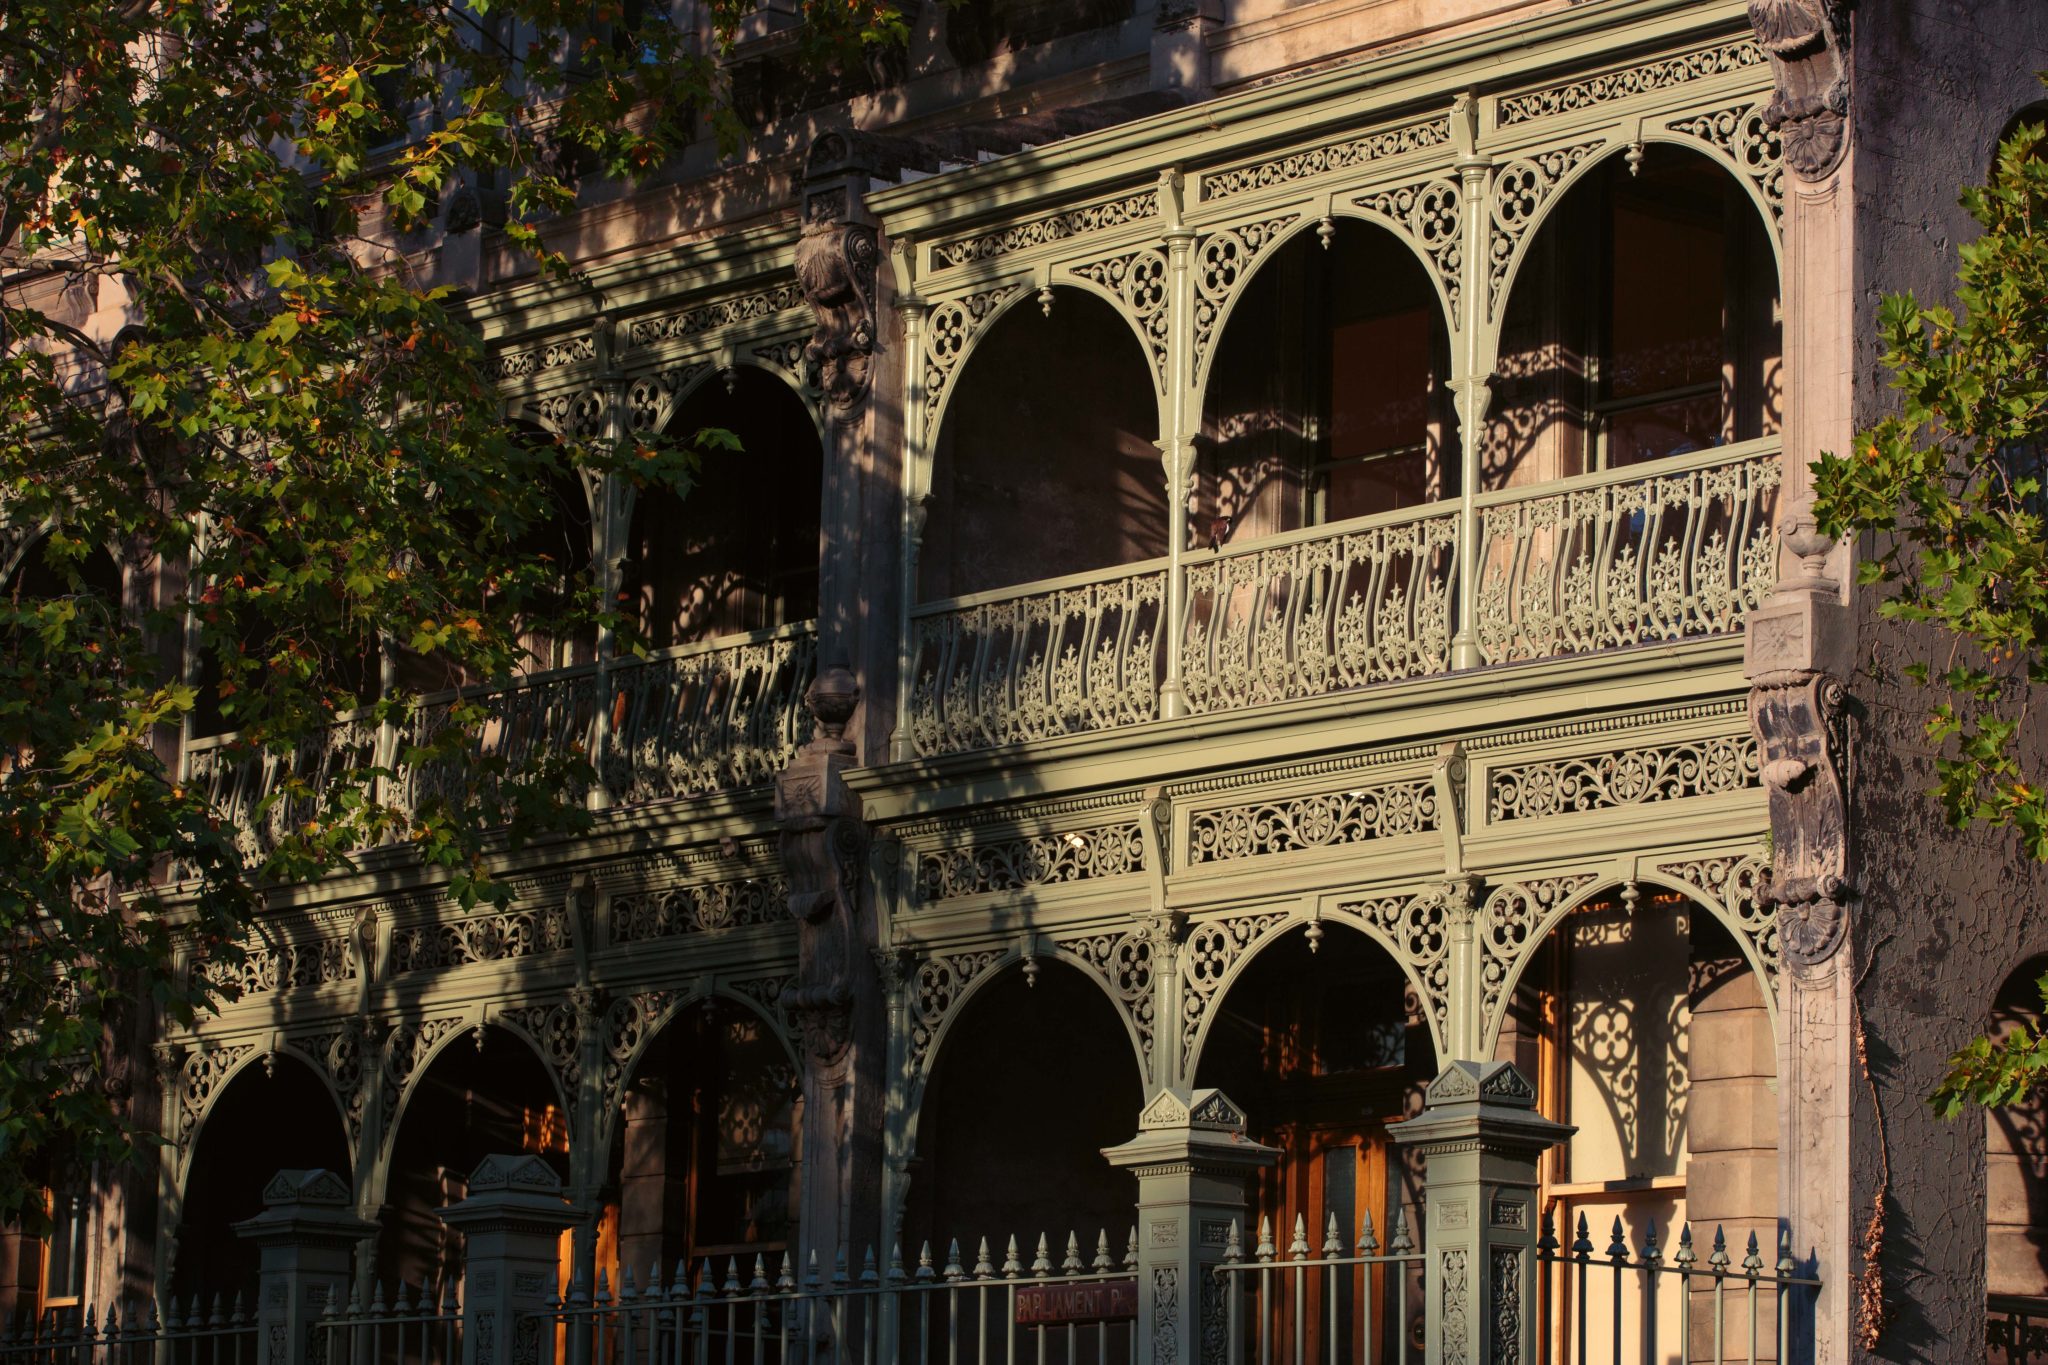 Iron lace on terrace houses in Melbourne, Australia